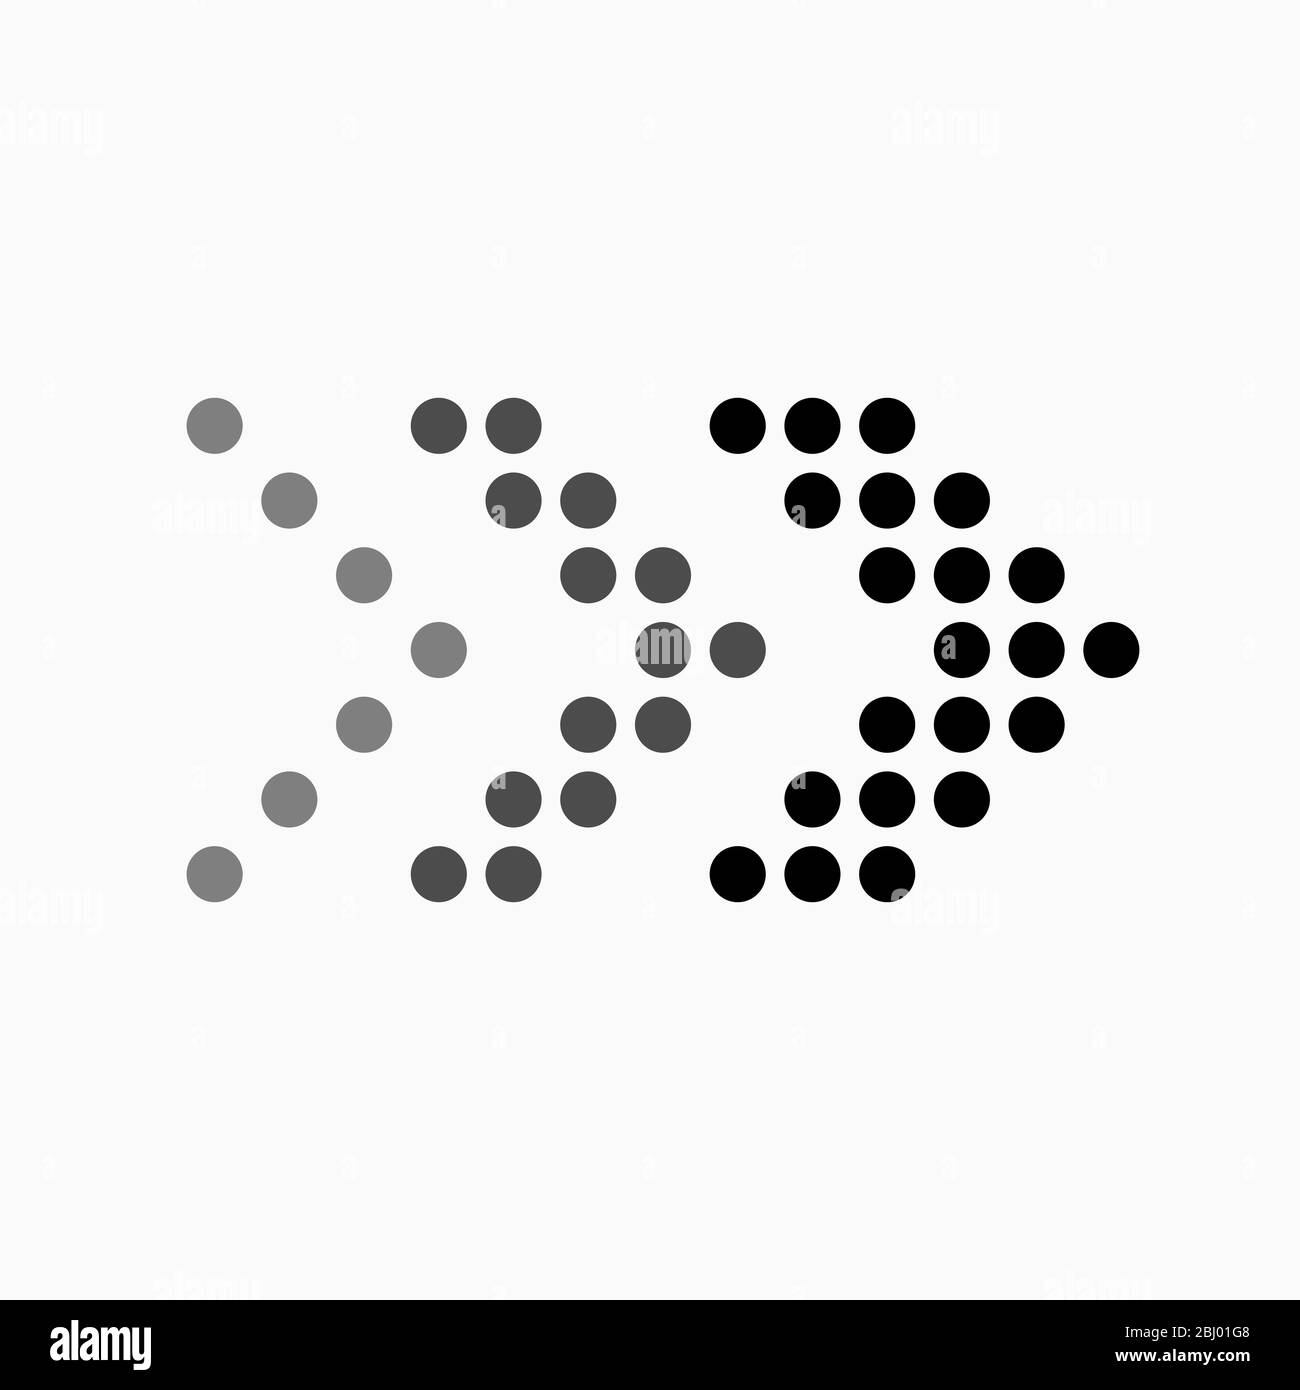 Dot arrow icon. Halftone effect. Isolated graphic element. Stock - Vector illustration. Stock Vector